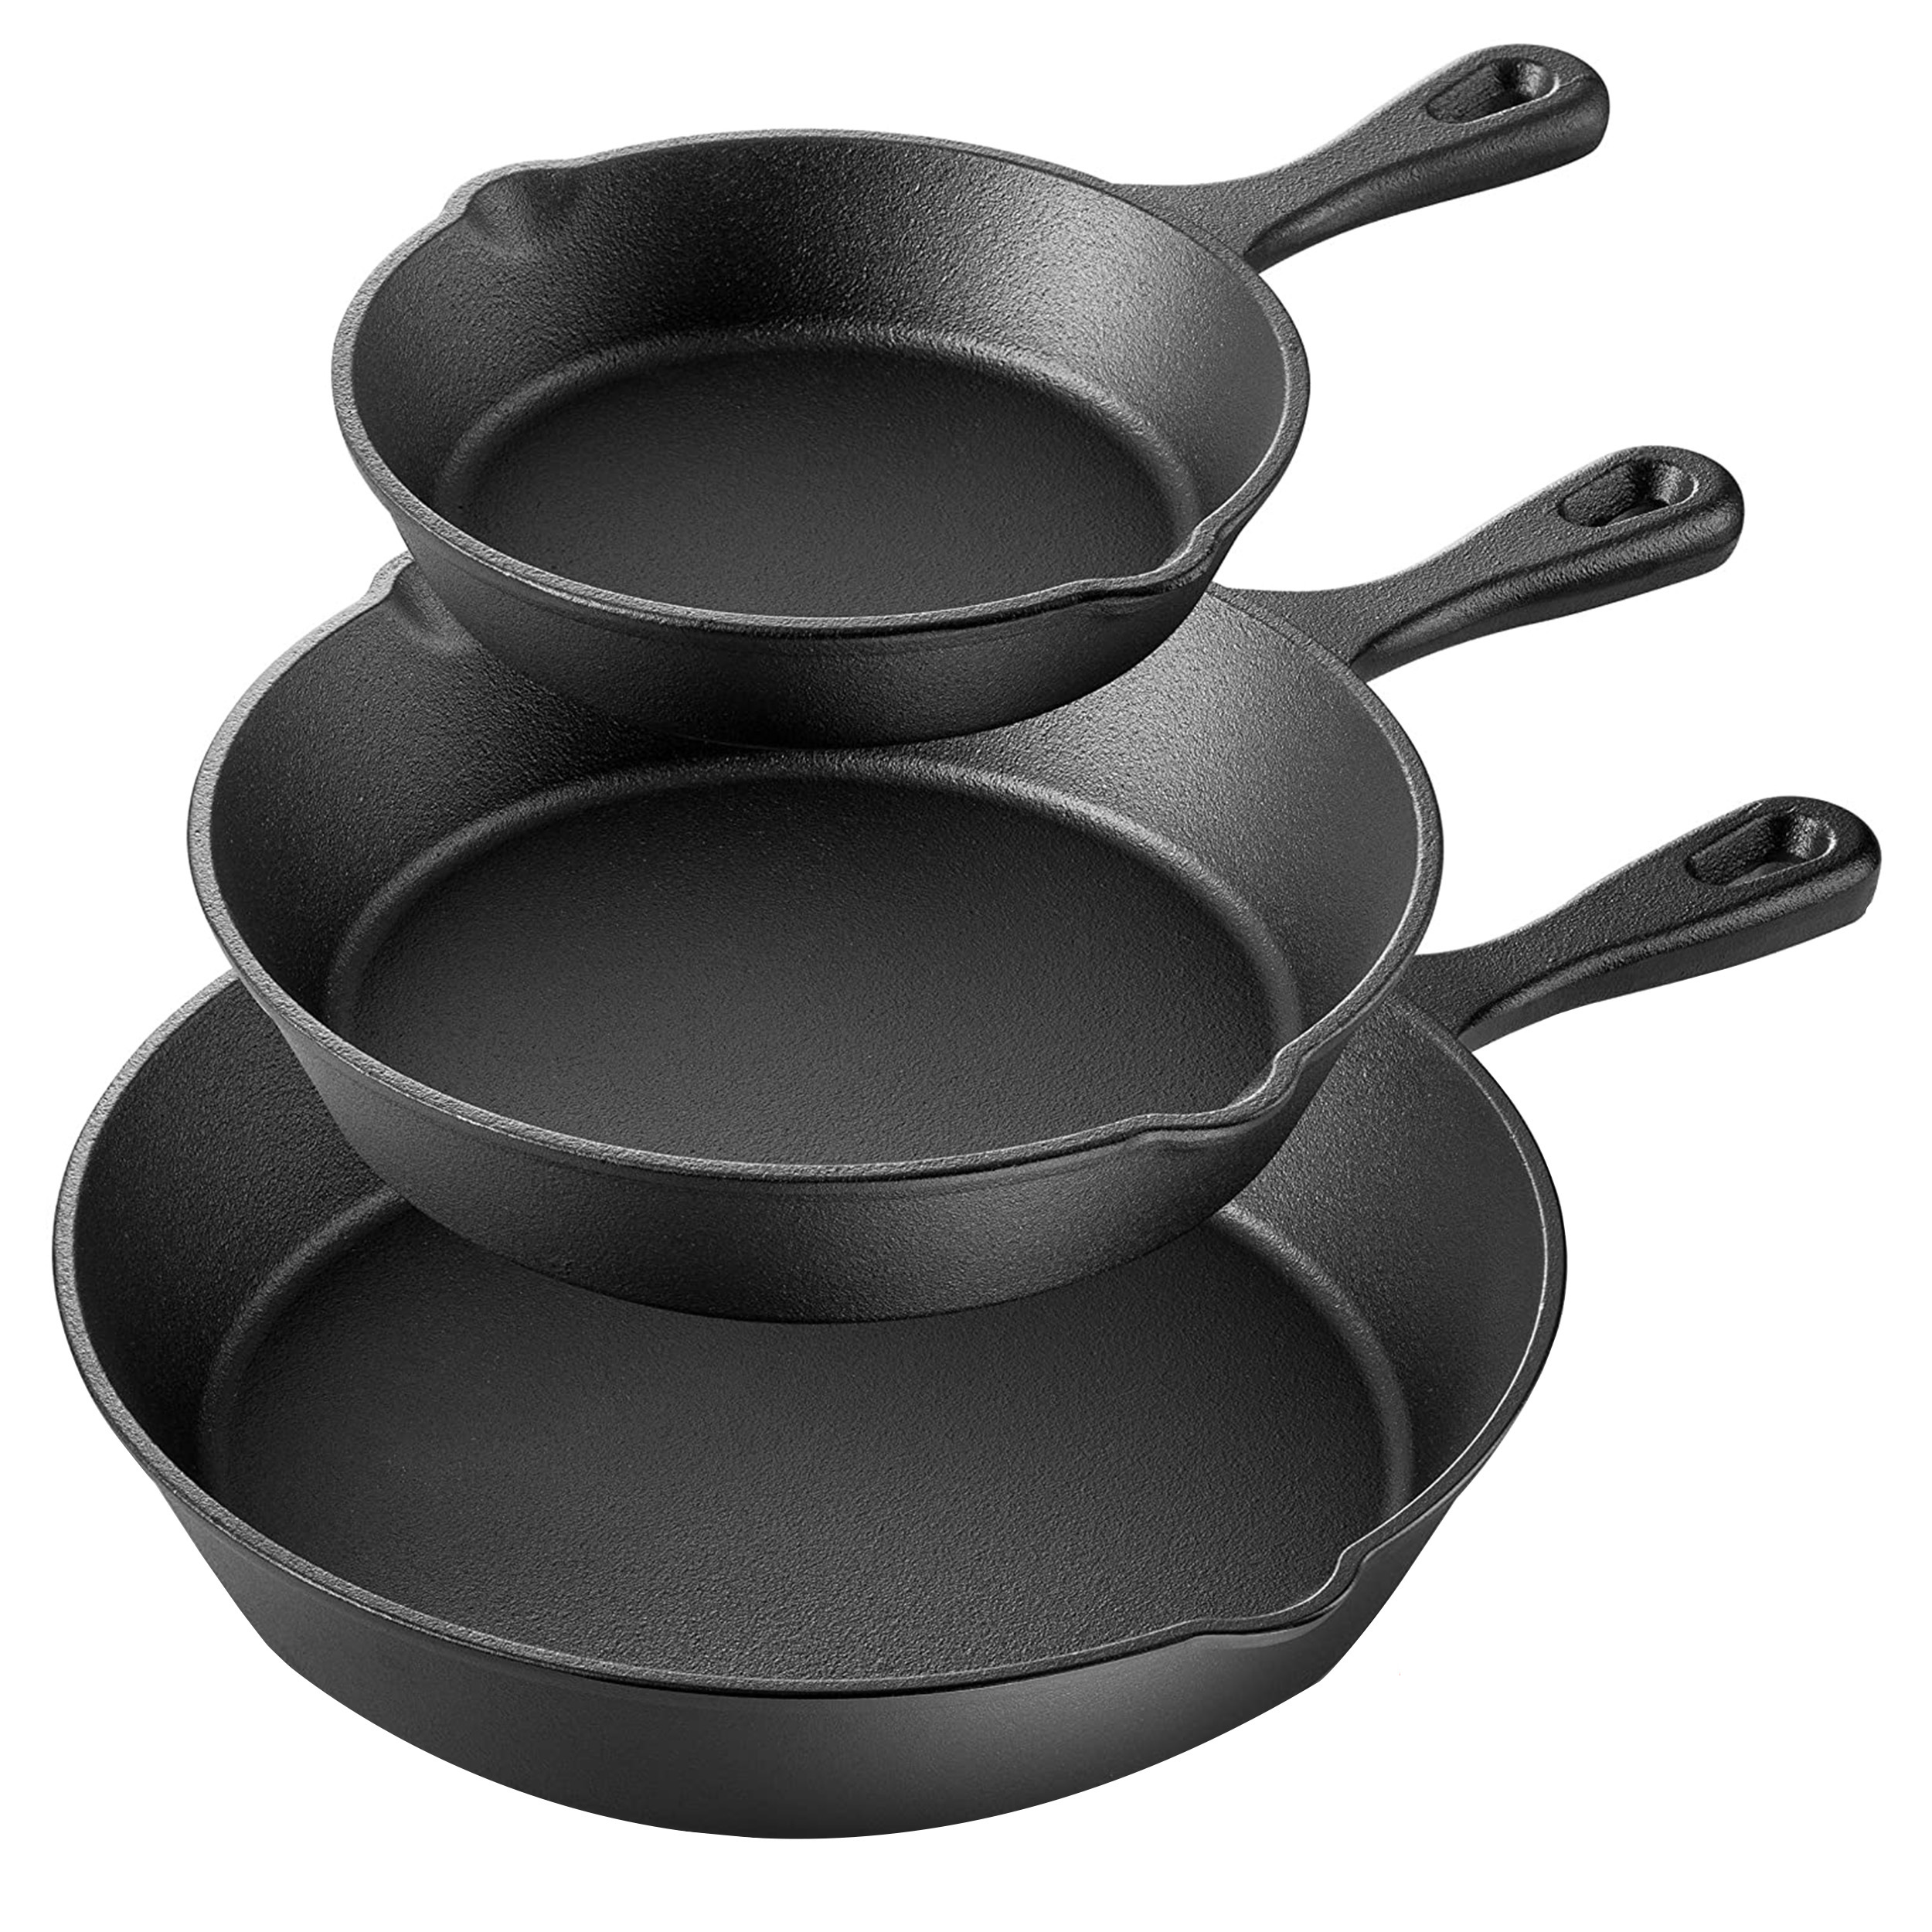 16 Iron Skillet  Geaux Ask Alice!